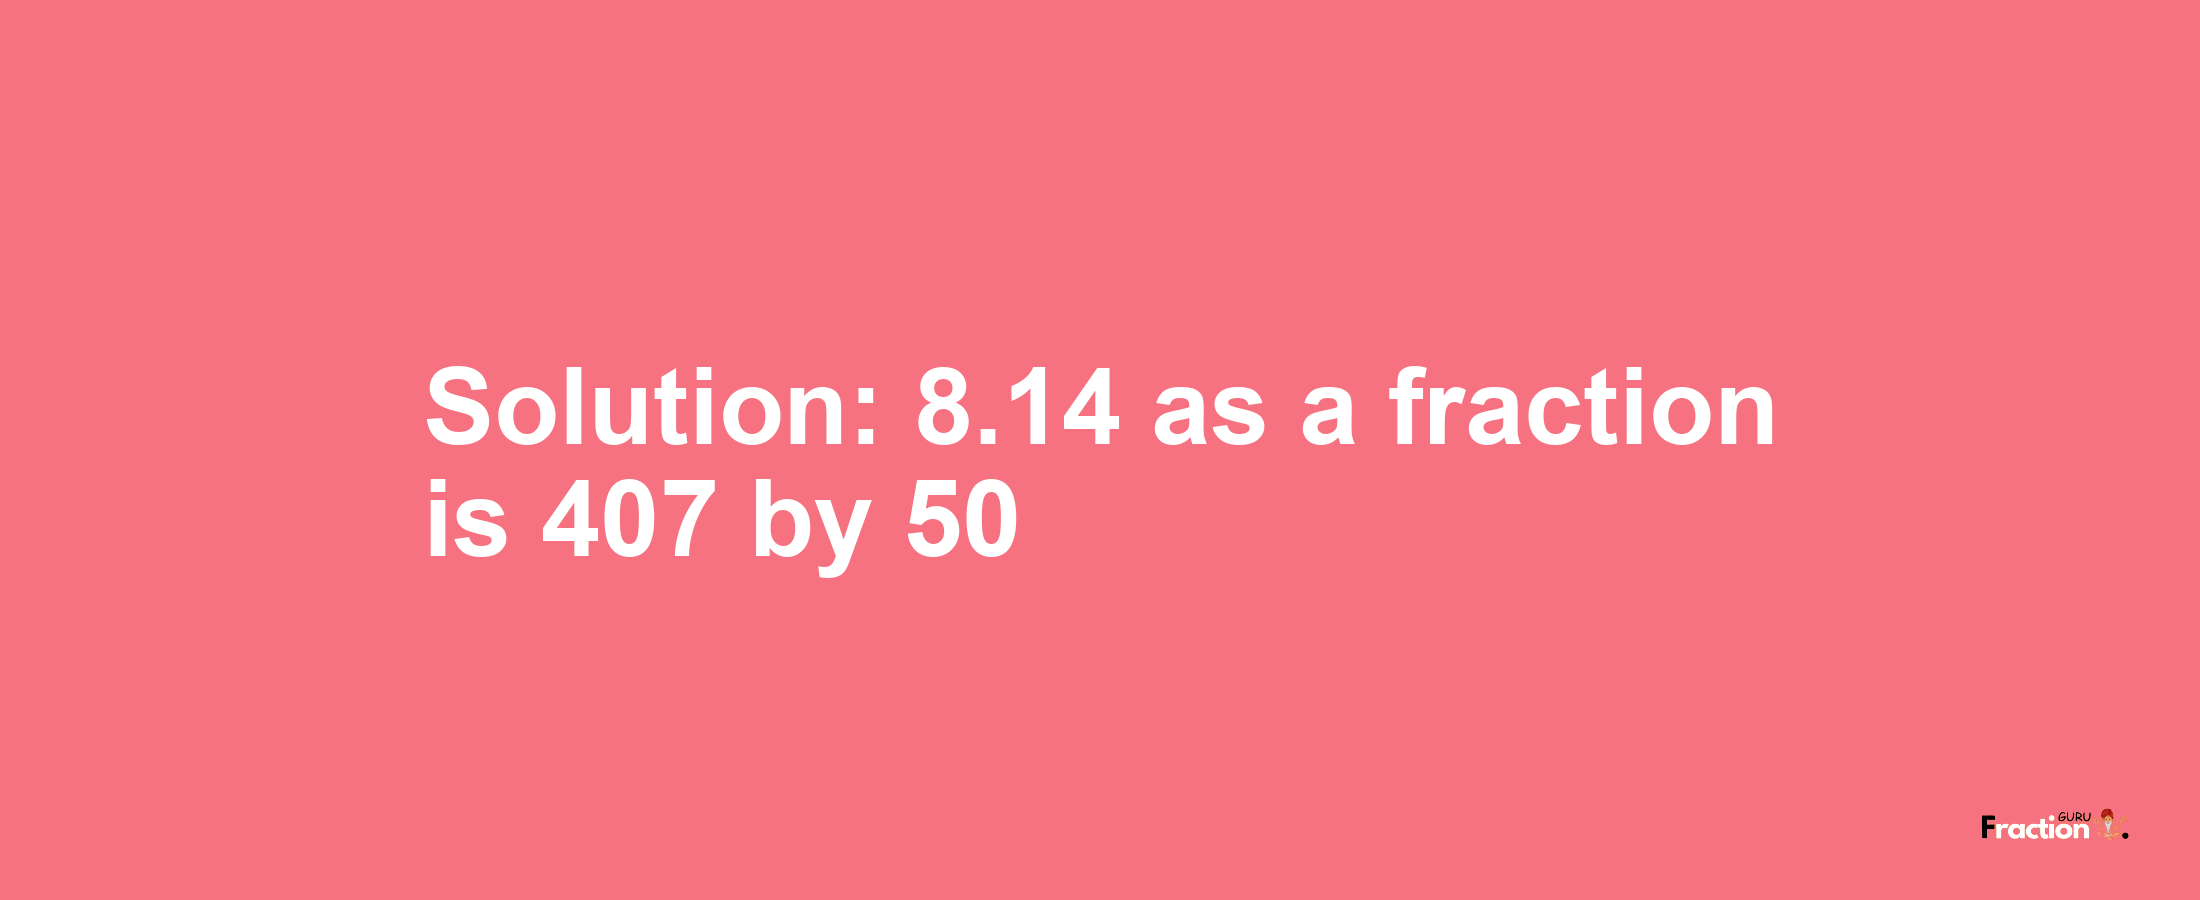 Solution:8.14 as a fraction is 407/50